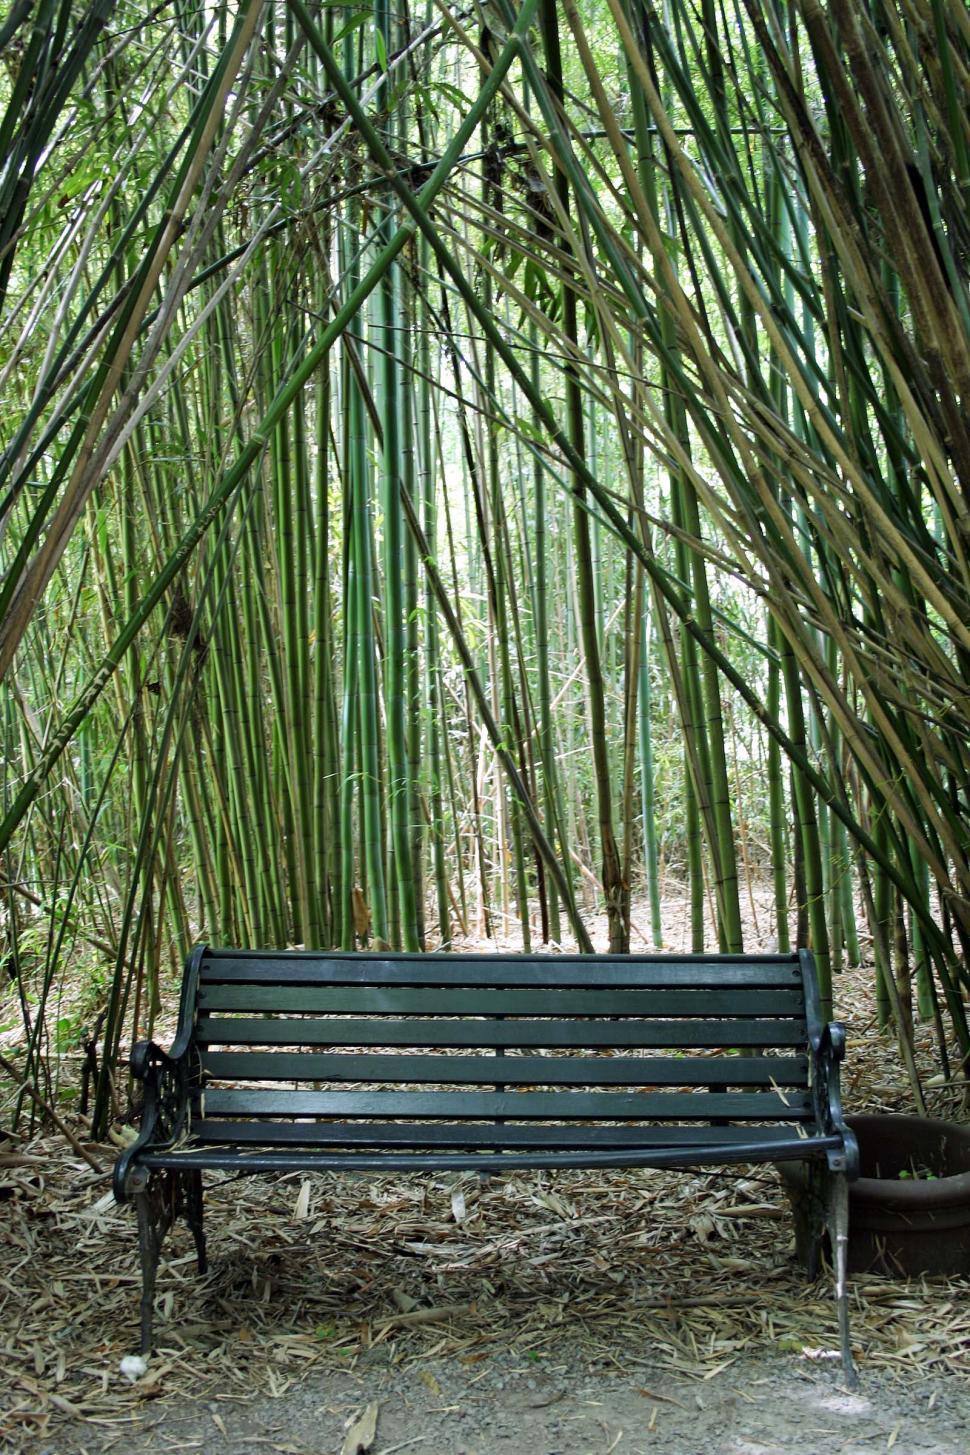 Free Image of bench reed reeds private seat south carolina 